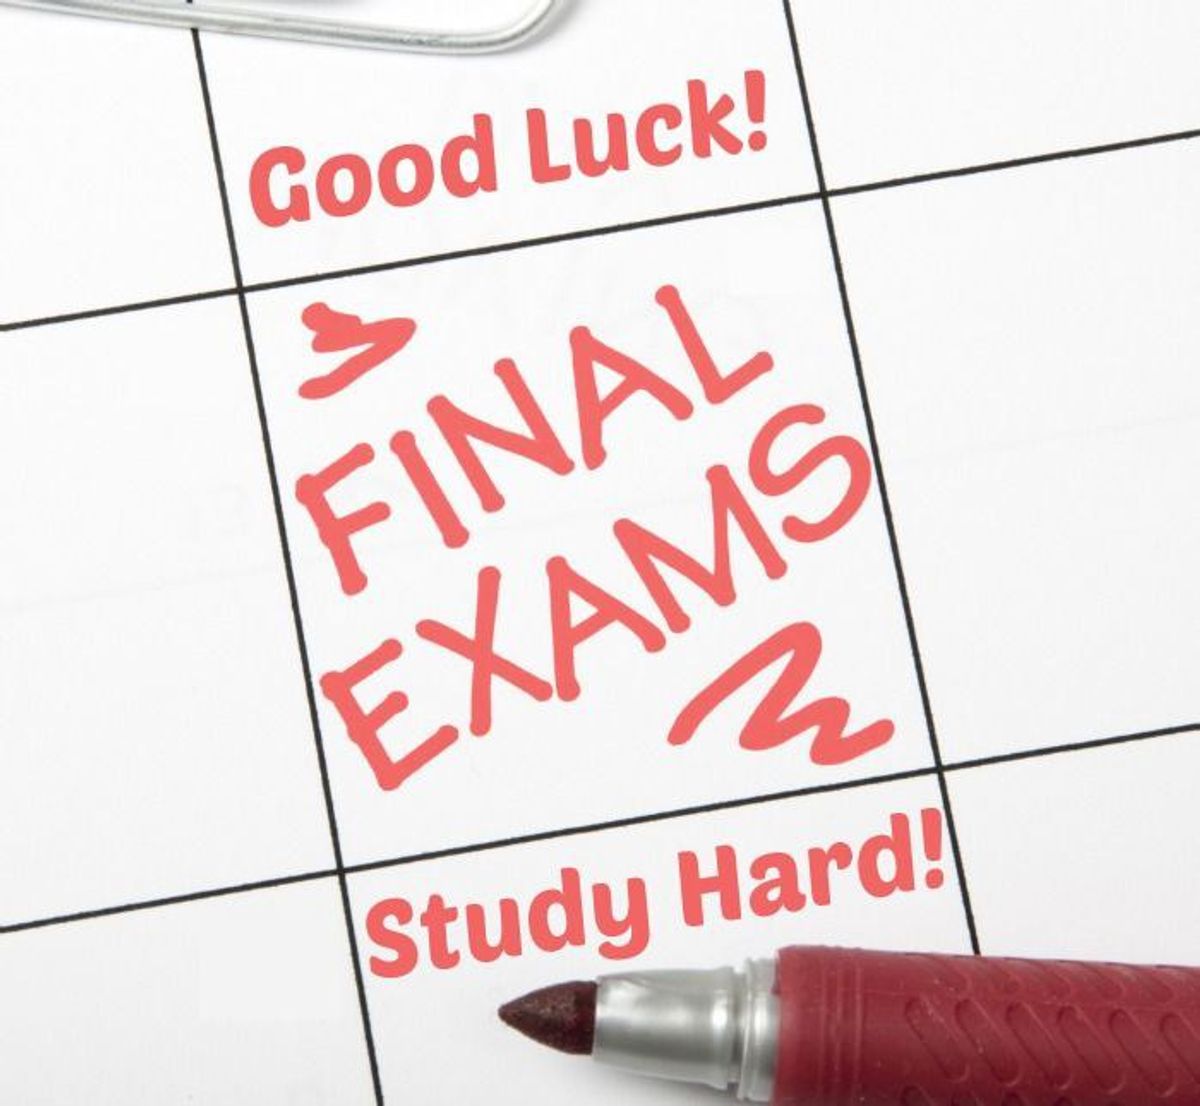 13 Tips To Get You Through Finals' Week